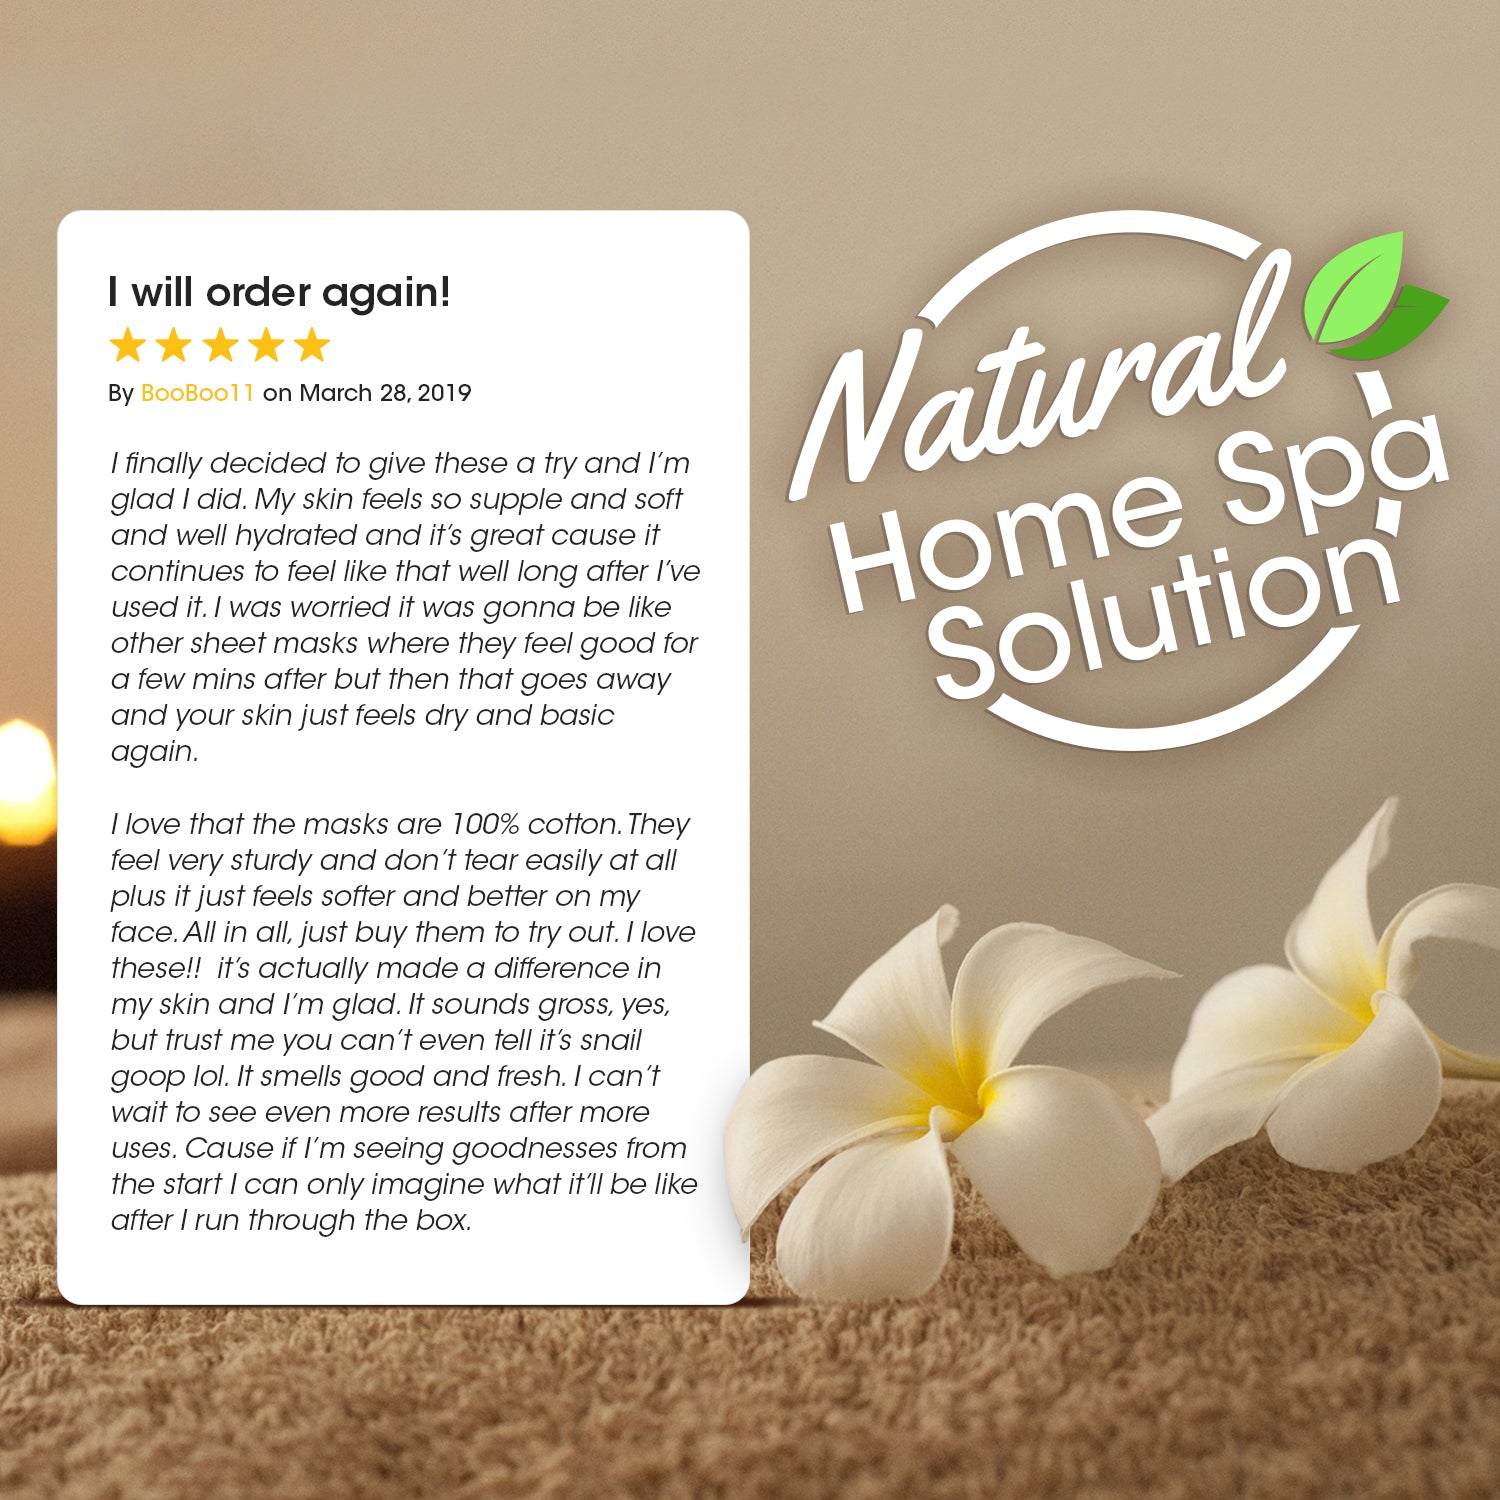 Natural home spa solution